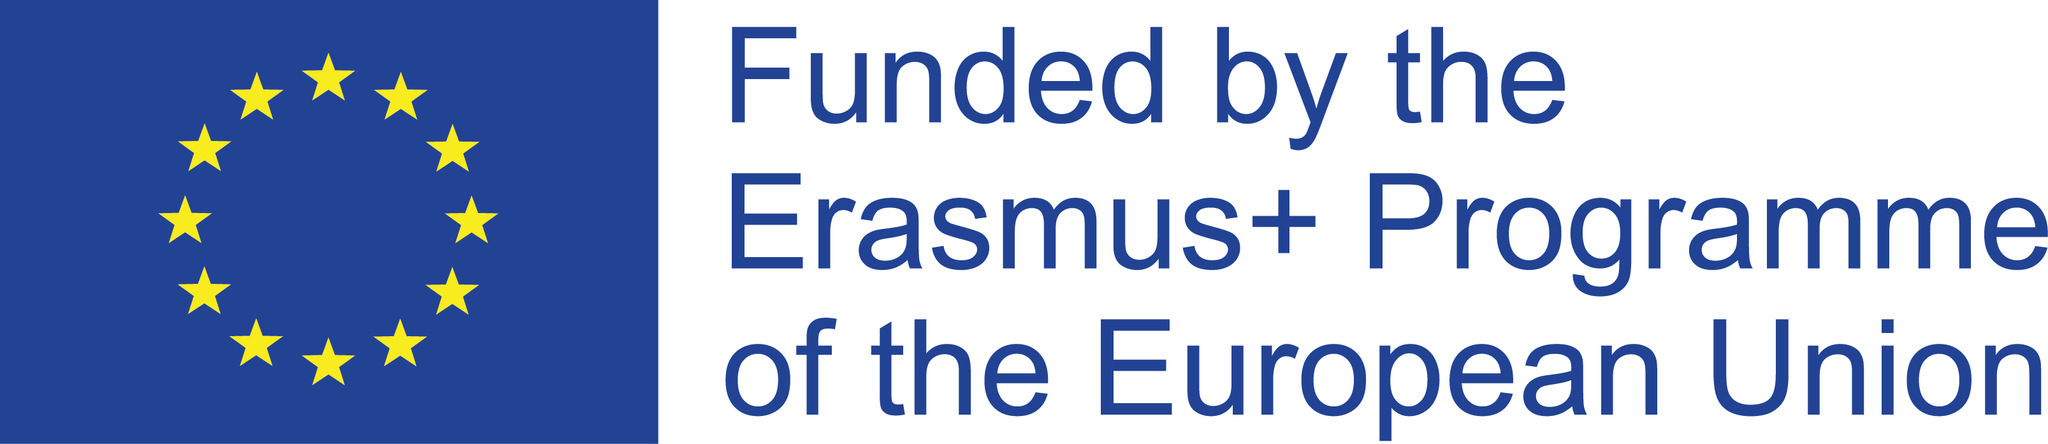 co funded by the Erasmus+ programme of the European Union